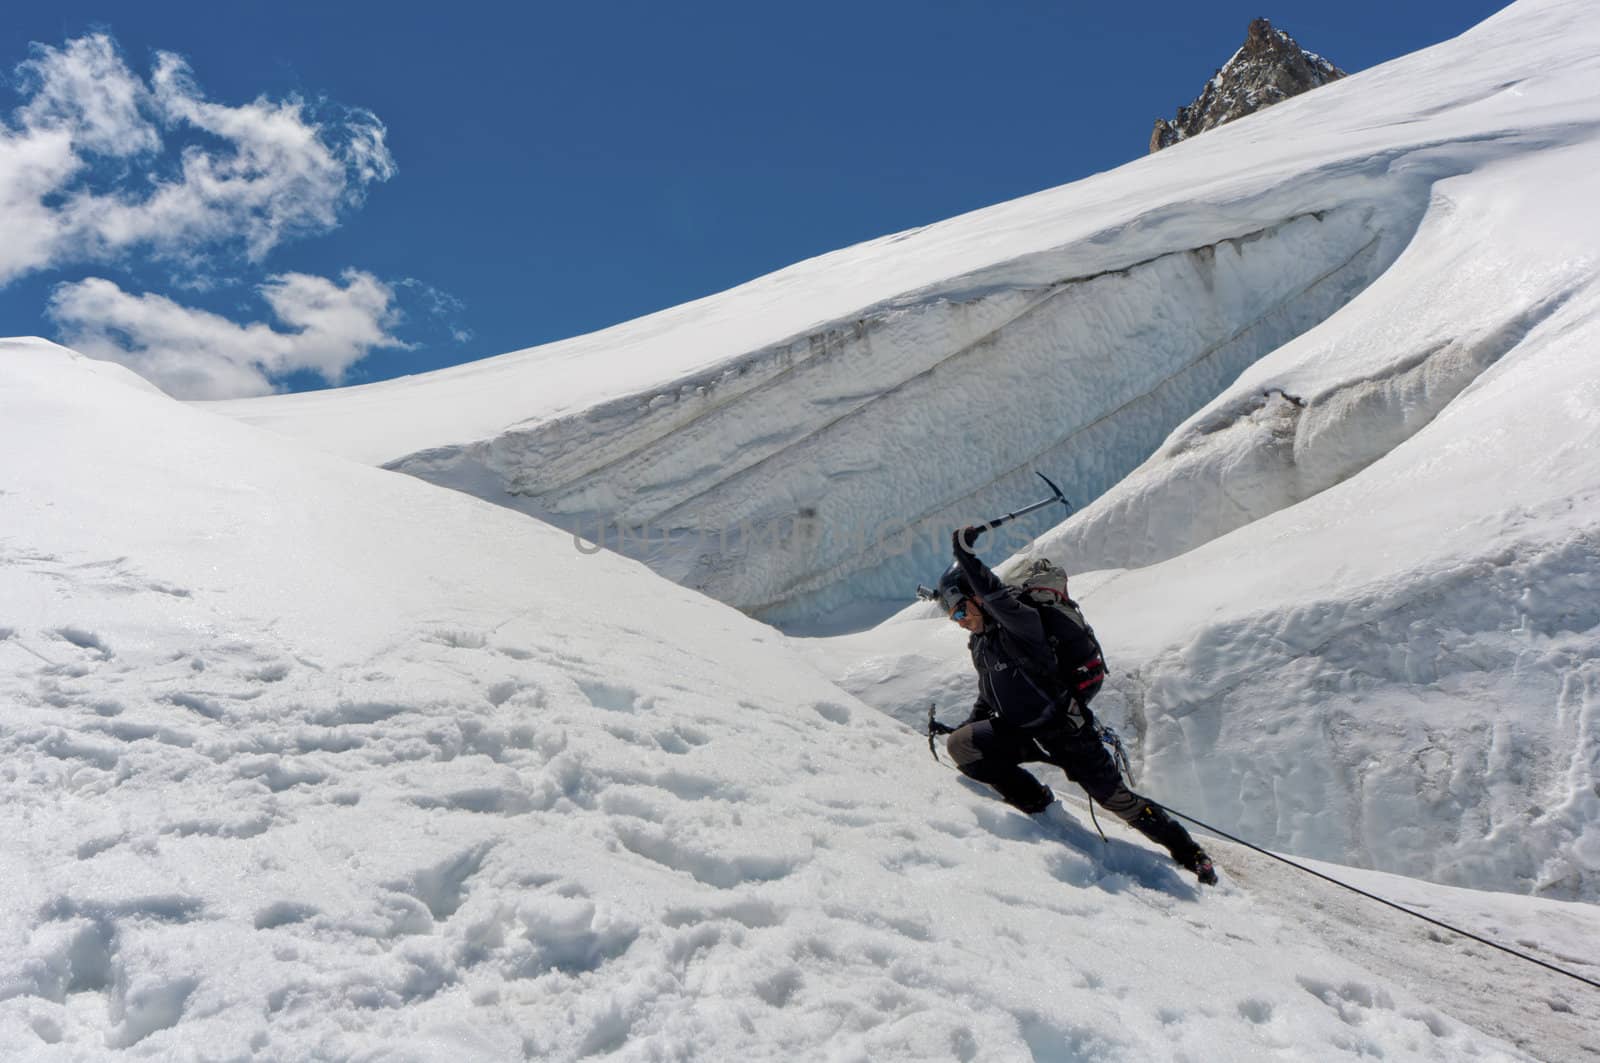 A male climber , dressed in black, climbs up a snowy slope. Winter clear sky day.